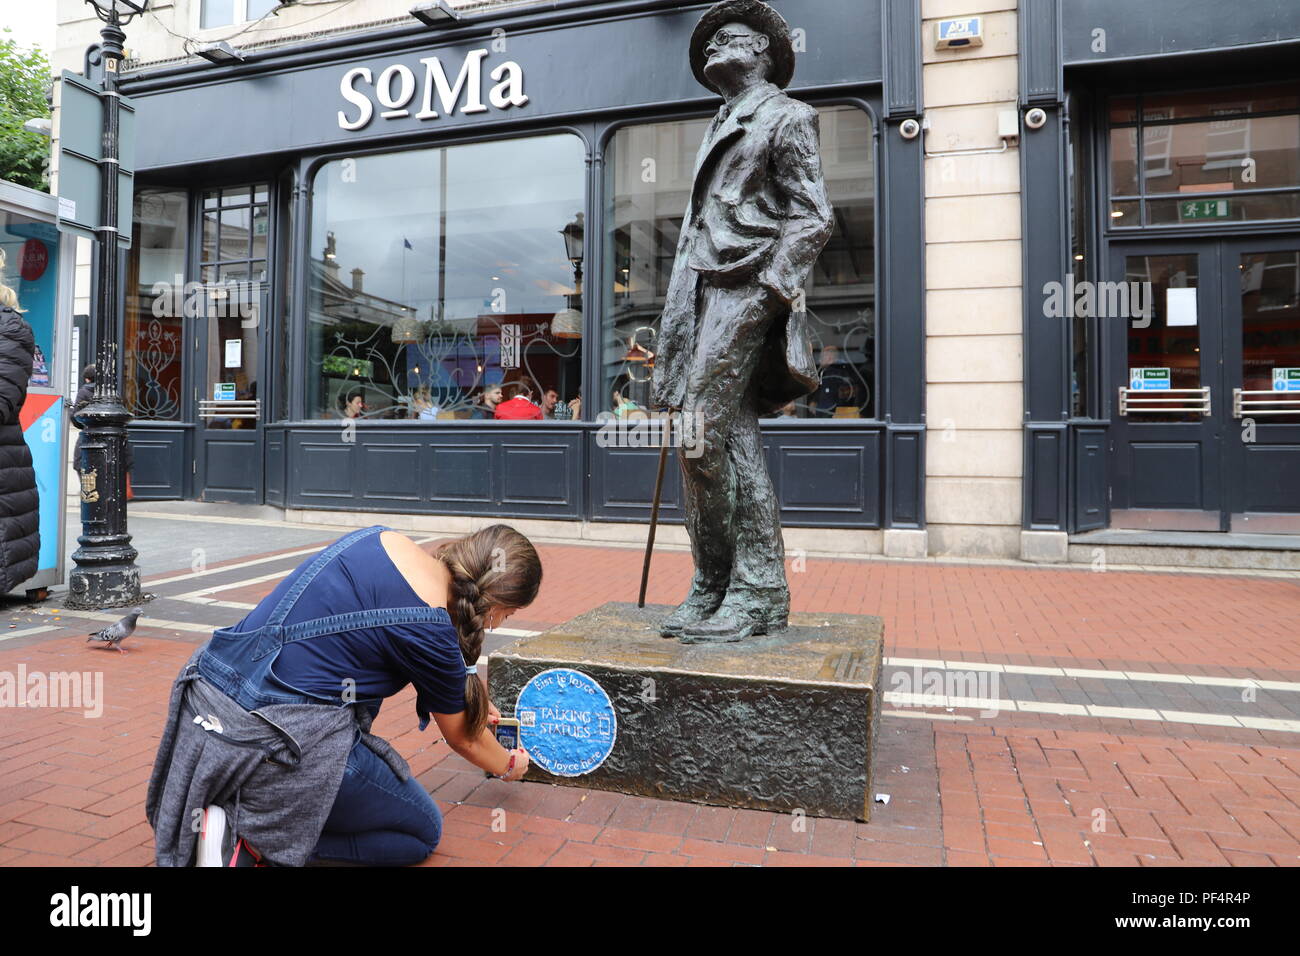 Dublin. 19th Aug, 2018. A woman scans the QR Code at the bottom of a statue of James Joyce, a famous Irish novelist in downtown Dublin, Ireland, Aug. 18, 2018. The Irish tourism department has recently launched a 'Talking Statue' initiative in Dublin, under which people can use smart phones to listen to the talks of 11 famous statues in the city by scanning the QR Codes attached to them. Credit: Xinhua/Alamy Live News Stock Photo